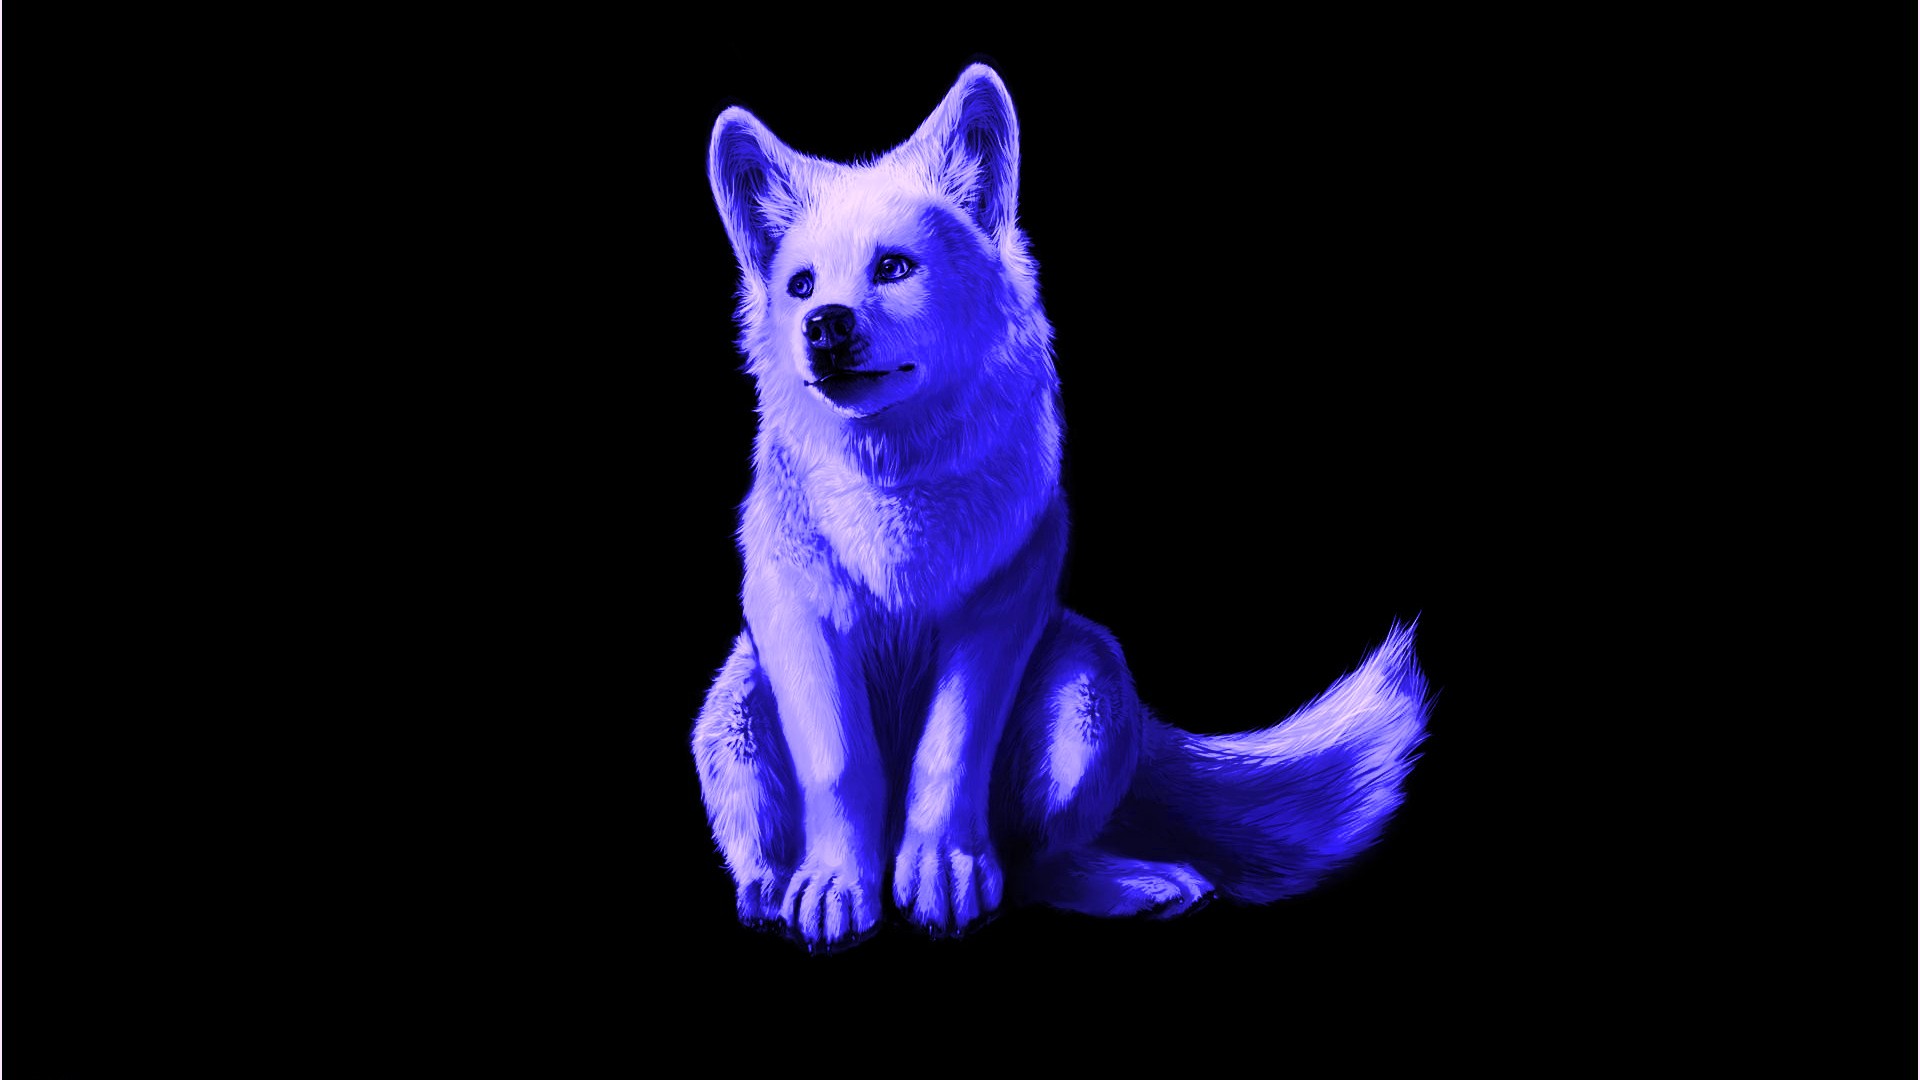 Wallpaper Cool Wolf HD with high-resolution 1920x1080 pixel. You can use this wallpaper for your Desktop Computer Backgrounds, Mac Wallpapers, Android Lock screen or iPhone Screensavers and another smartphone device